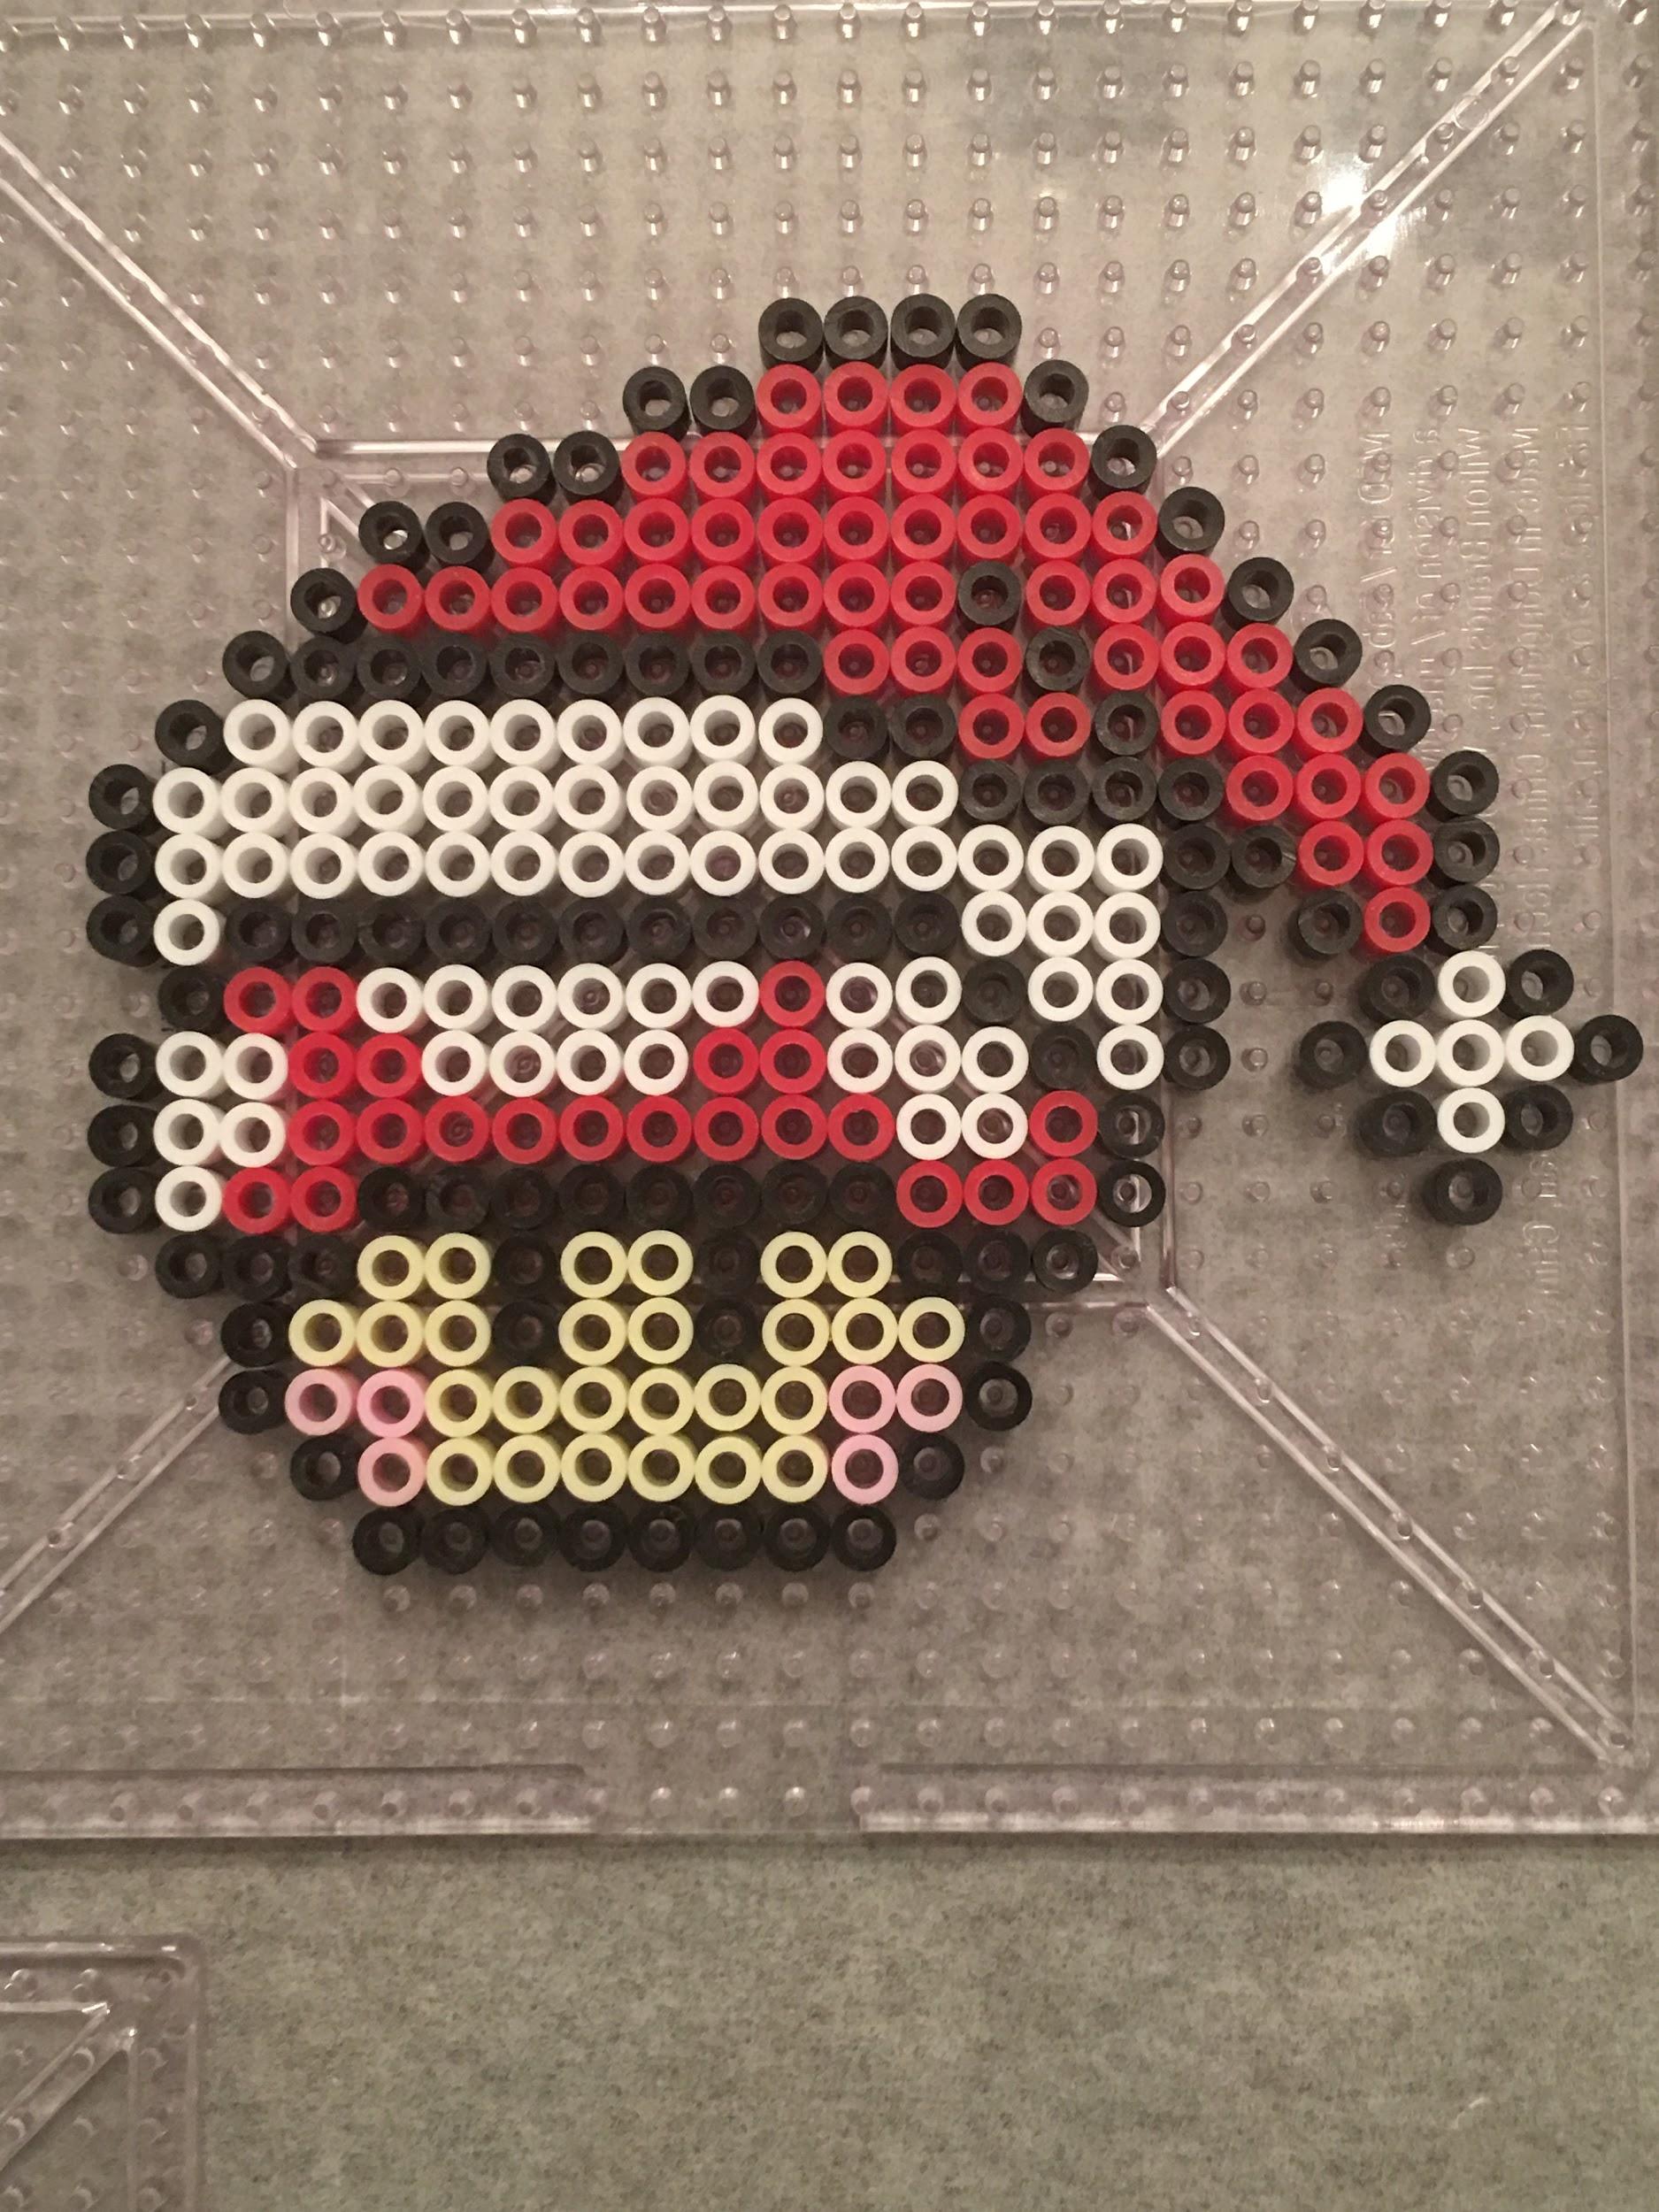 Mario Themed Perler Bead Patterns – For Parents,Teachers, Scout